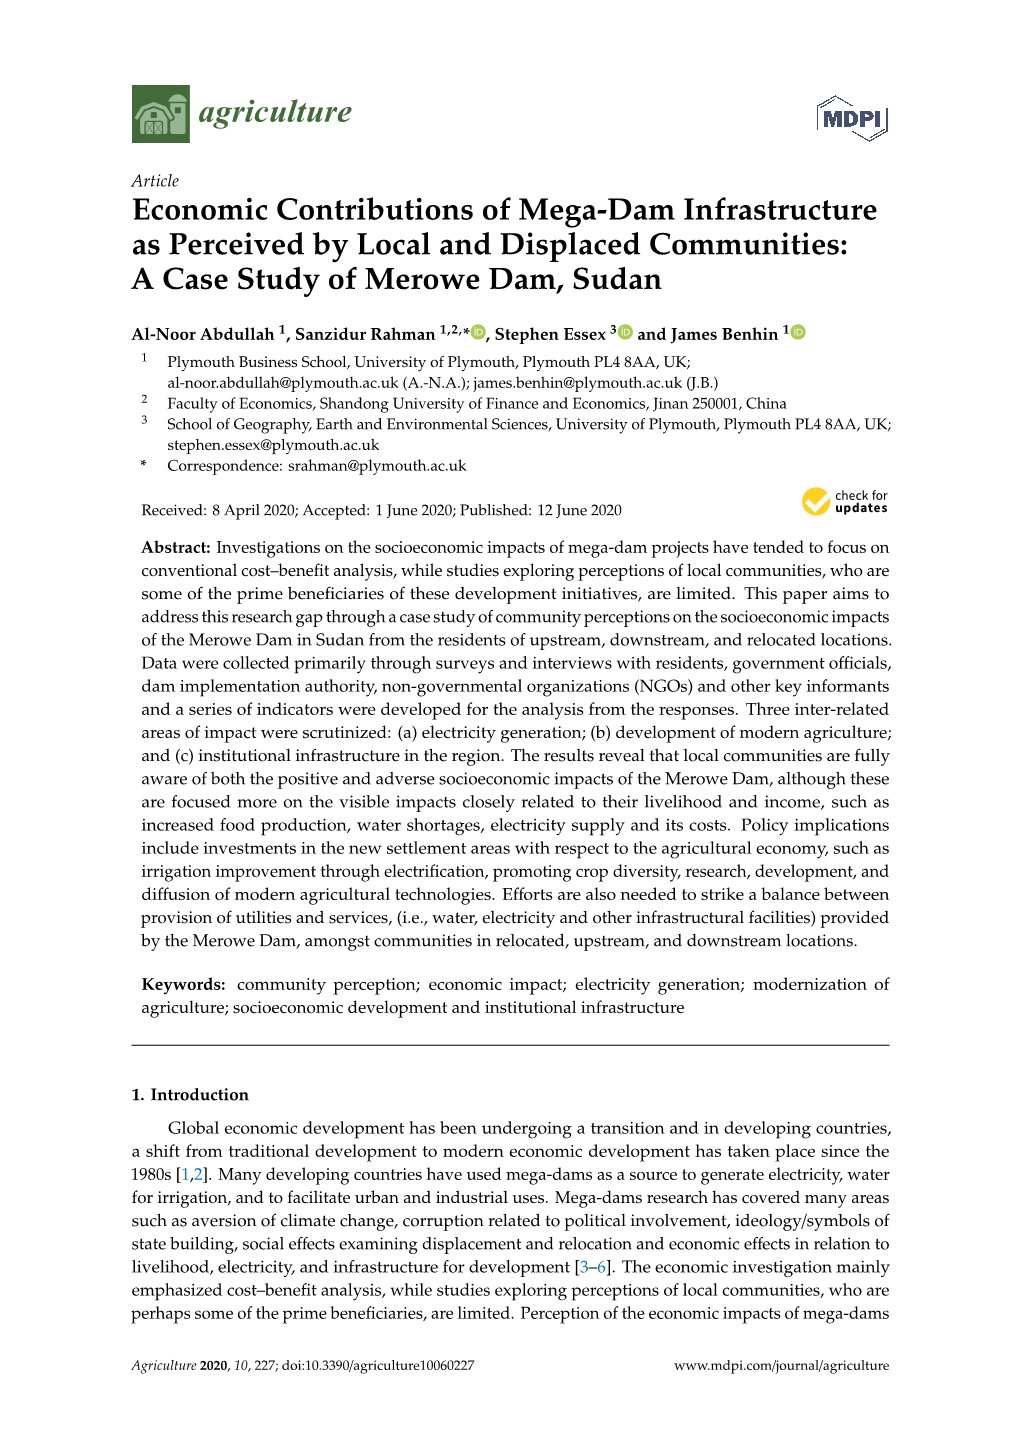 Economic Contributions of Mega-Dam Infrastructure As Perceived by Local and Displaced Communities: a Case Study of Merowe Dam, Sudan